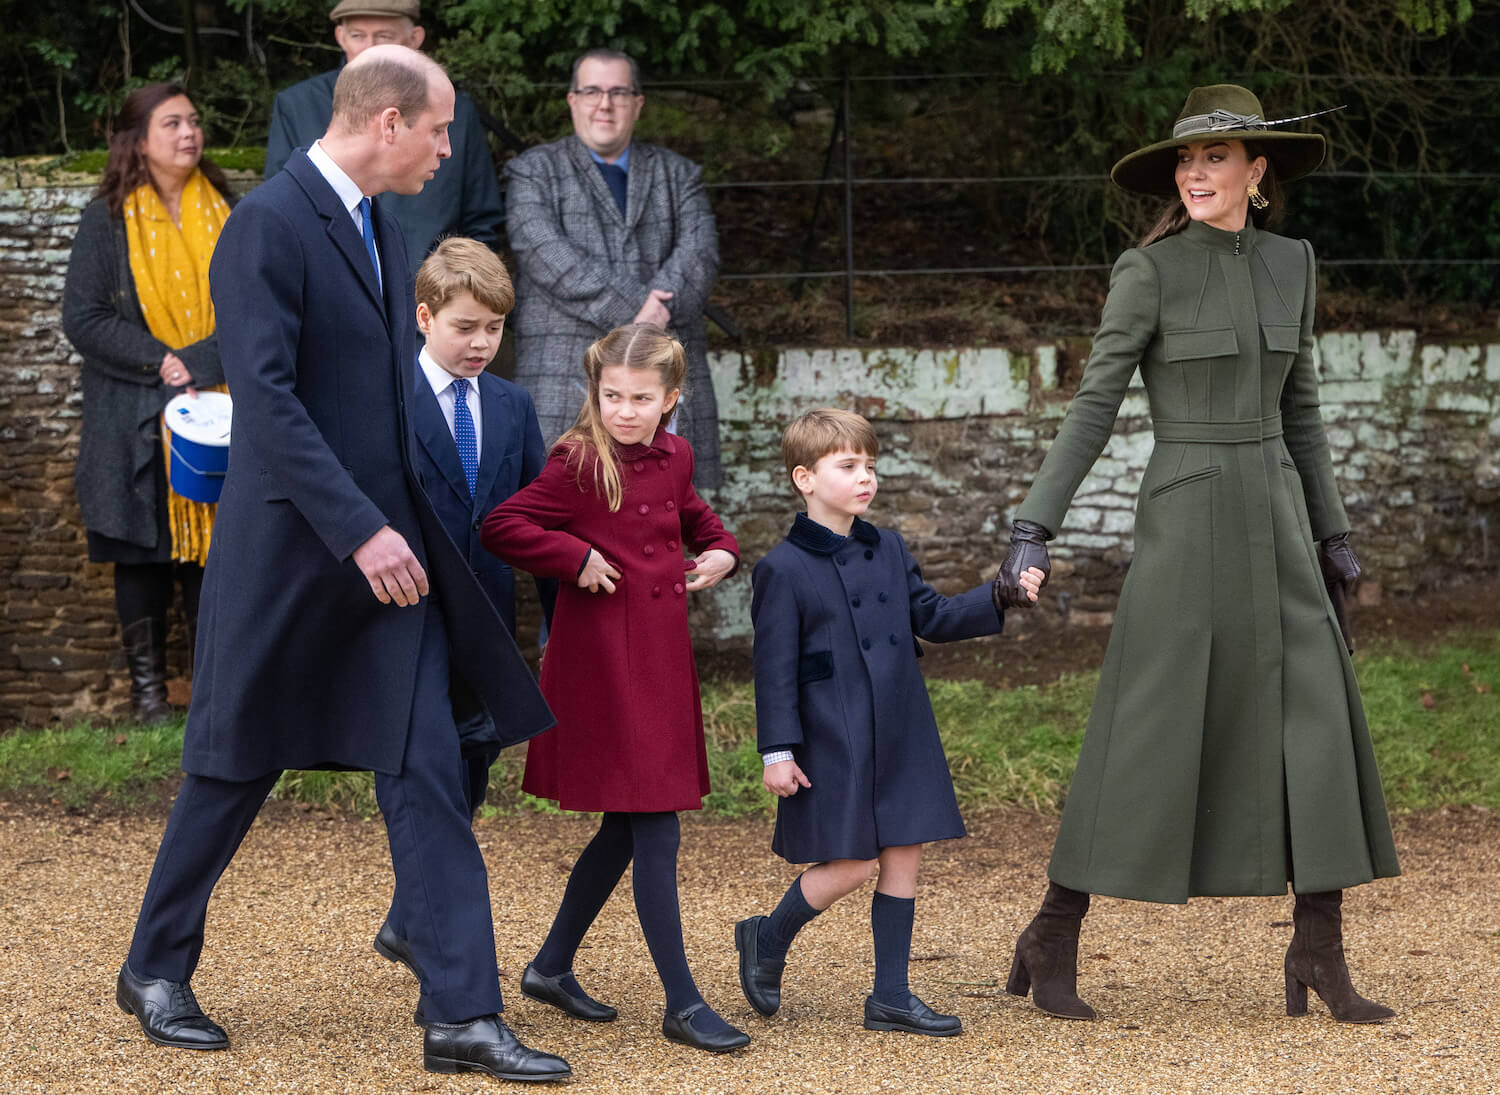 Kate Middleton Shows ‘Bittersweet Emotions’ About Motherhood in New Photos With Her Children, Body Language Expert Says